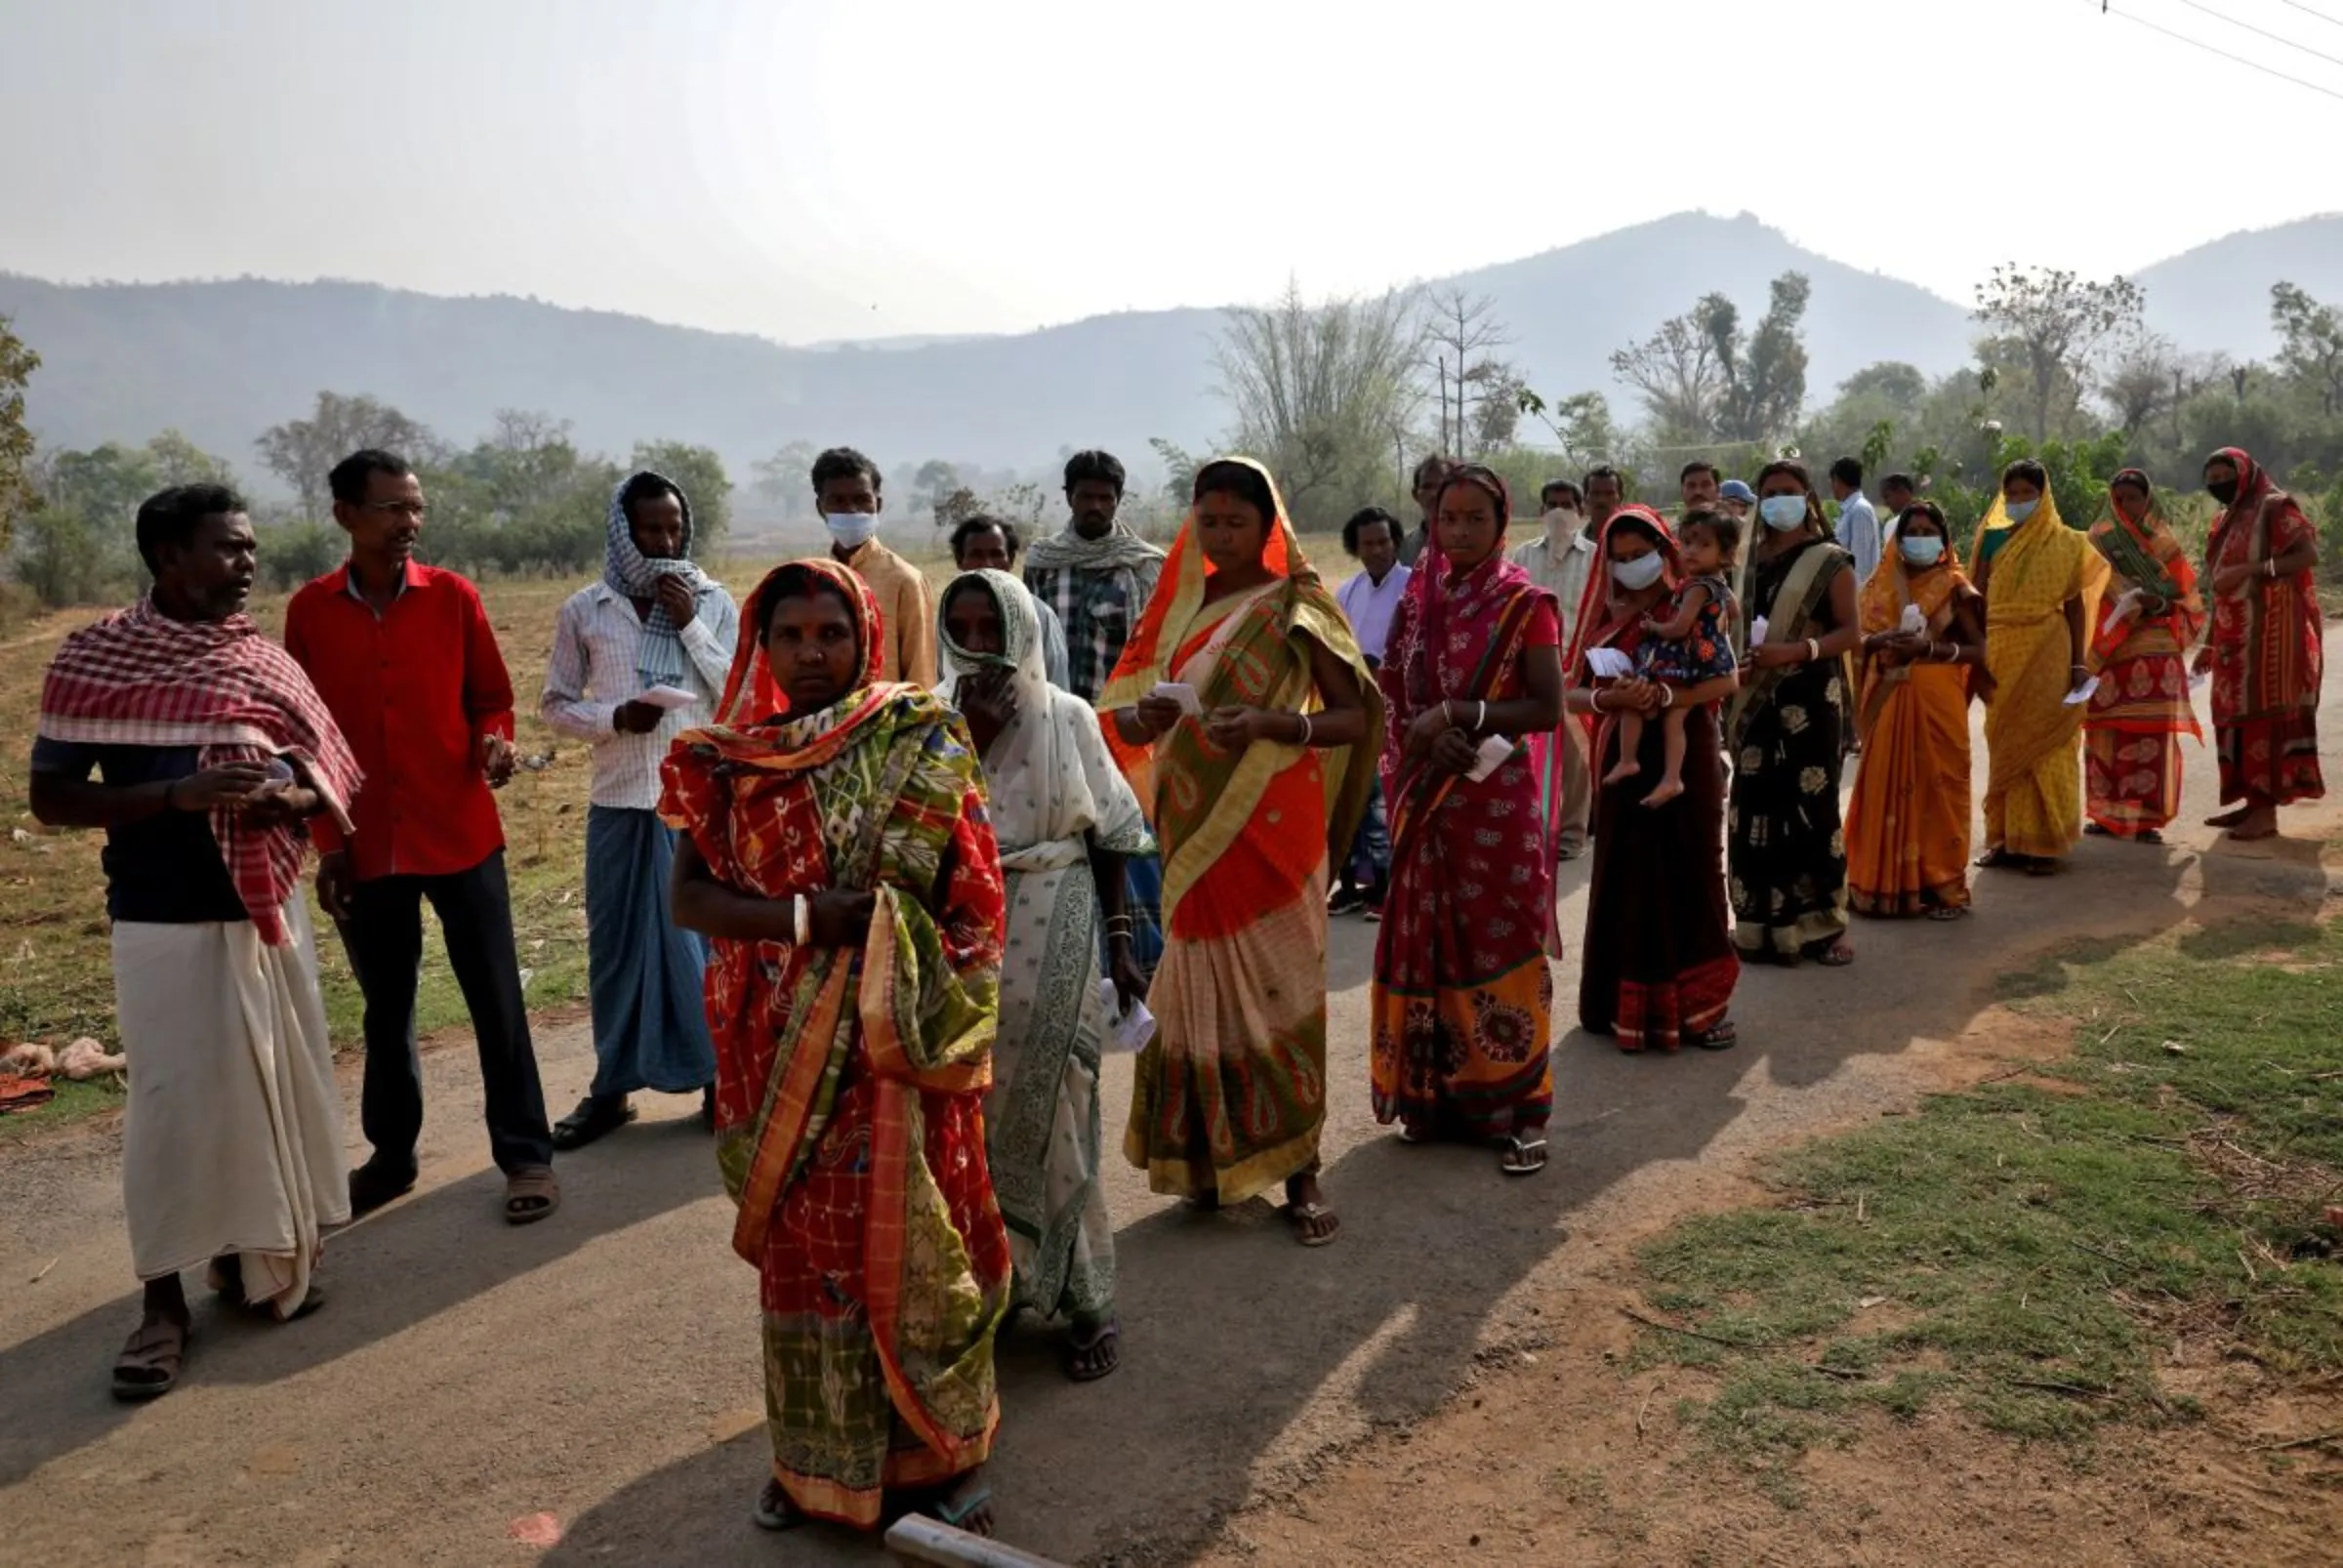 People wait in lines to cast their vote outside a polling stationin Purulia district, India, March 27, 2021. REUTERS/Rupak De Chowdhuri